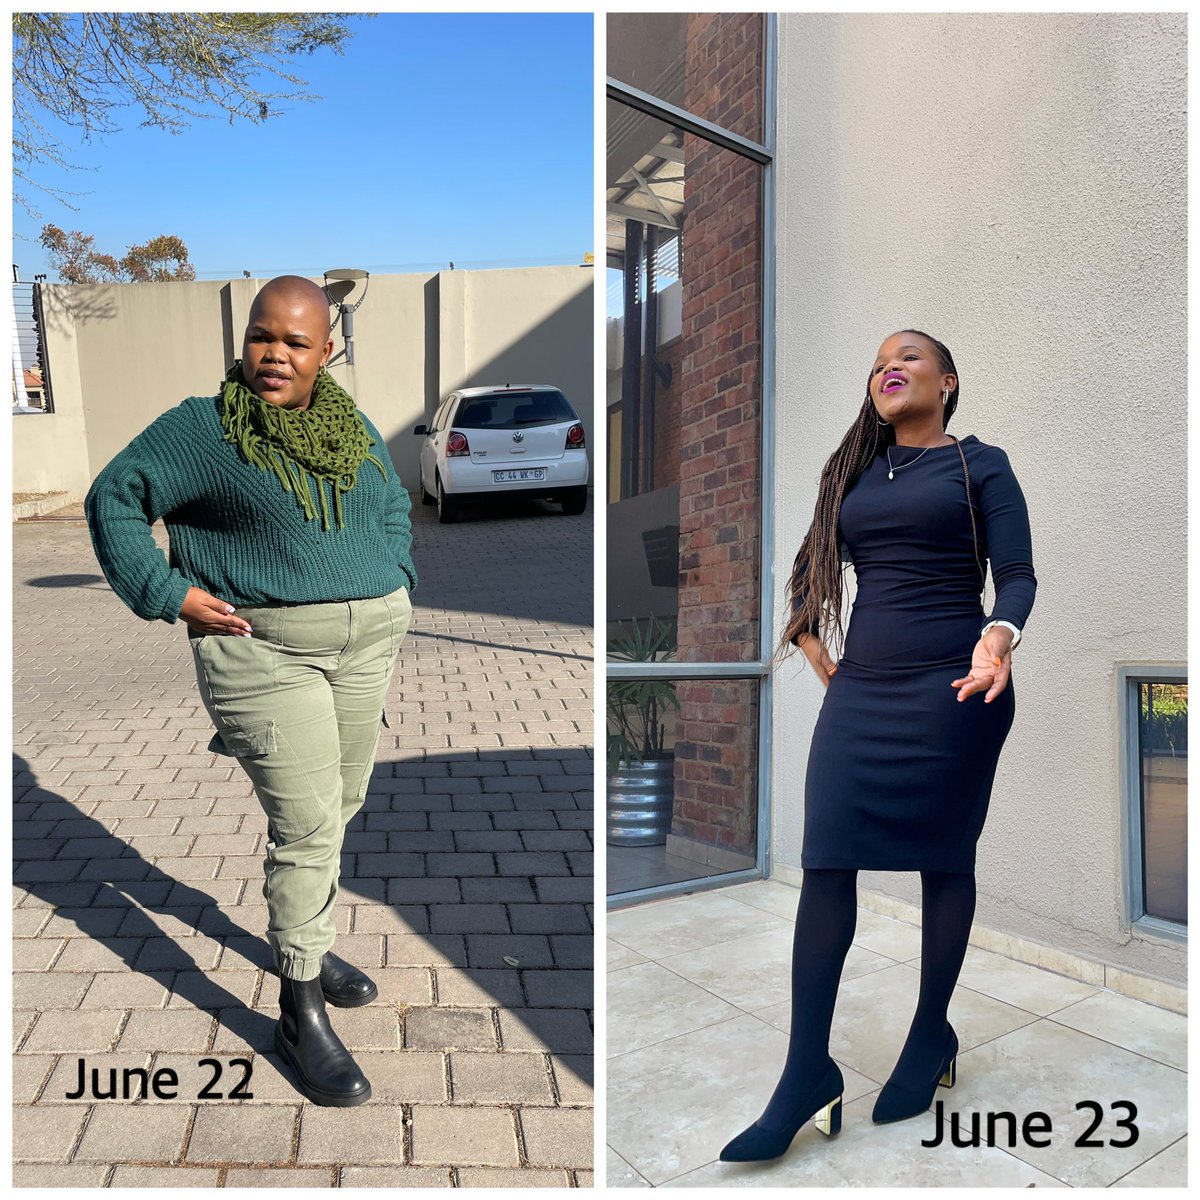 Nna I fetched my body Bathong 🤭

All I kept saying was I want to see what will happen if I don’t stop, the beauty is loving all the things I’ve been doing the past year. 

I learned how to swim
Became a better runner 

#FetchYourBody2023 
#IFetchedMyBody
#RunningWithTumiSole